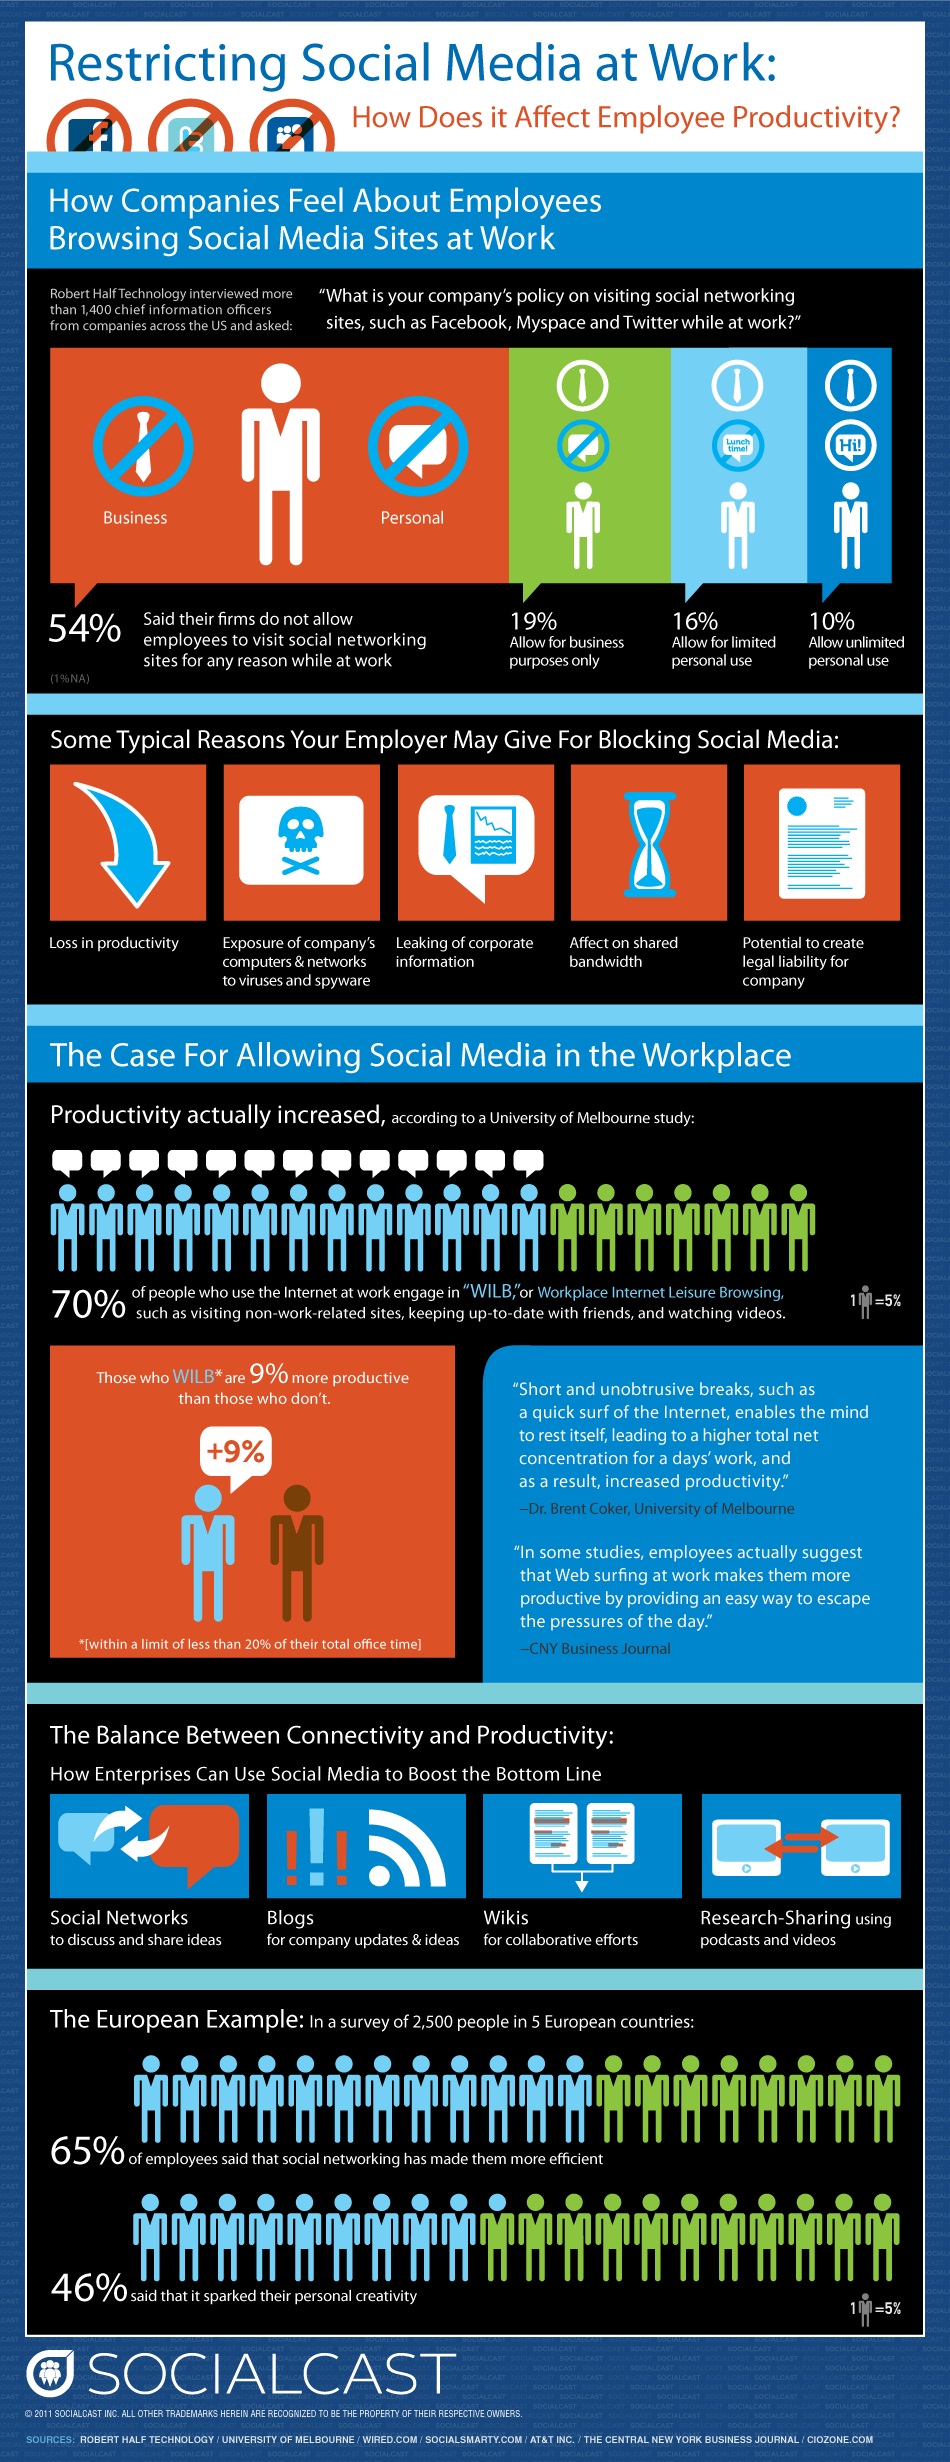 InfoGraphic on Restricting Social Media at Work,